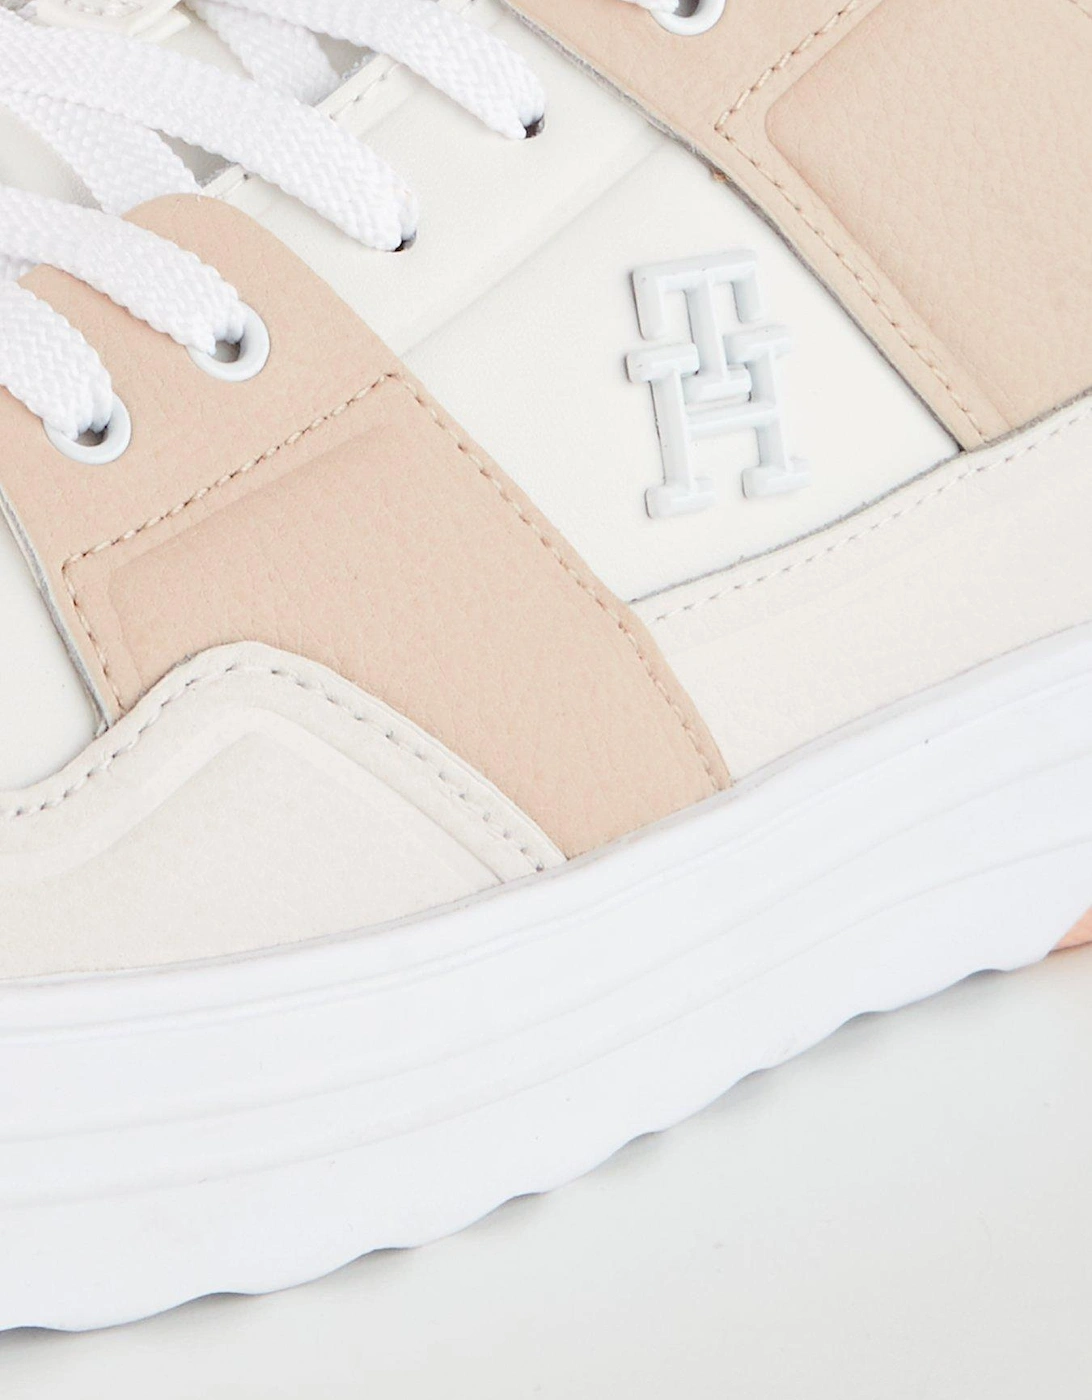 Lo Basket Leather Trainer - White